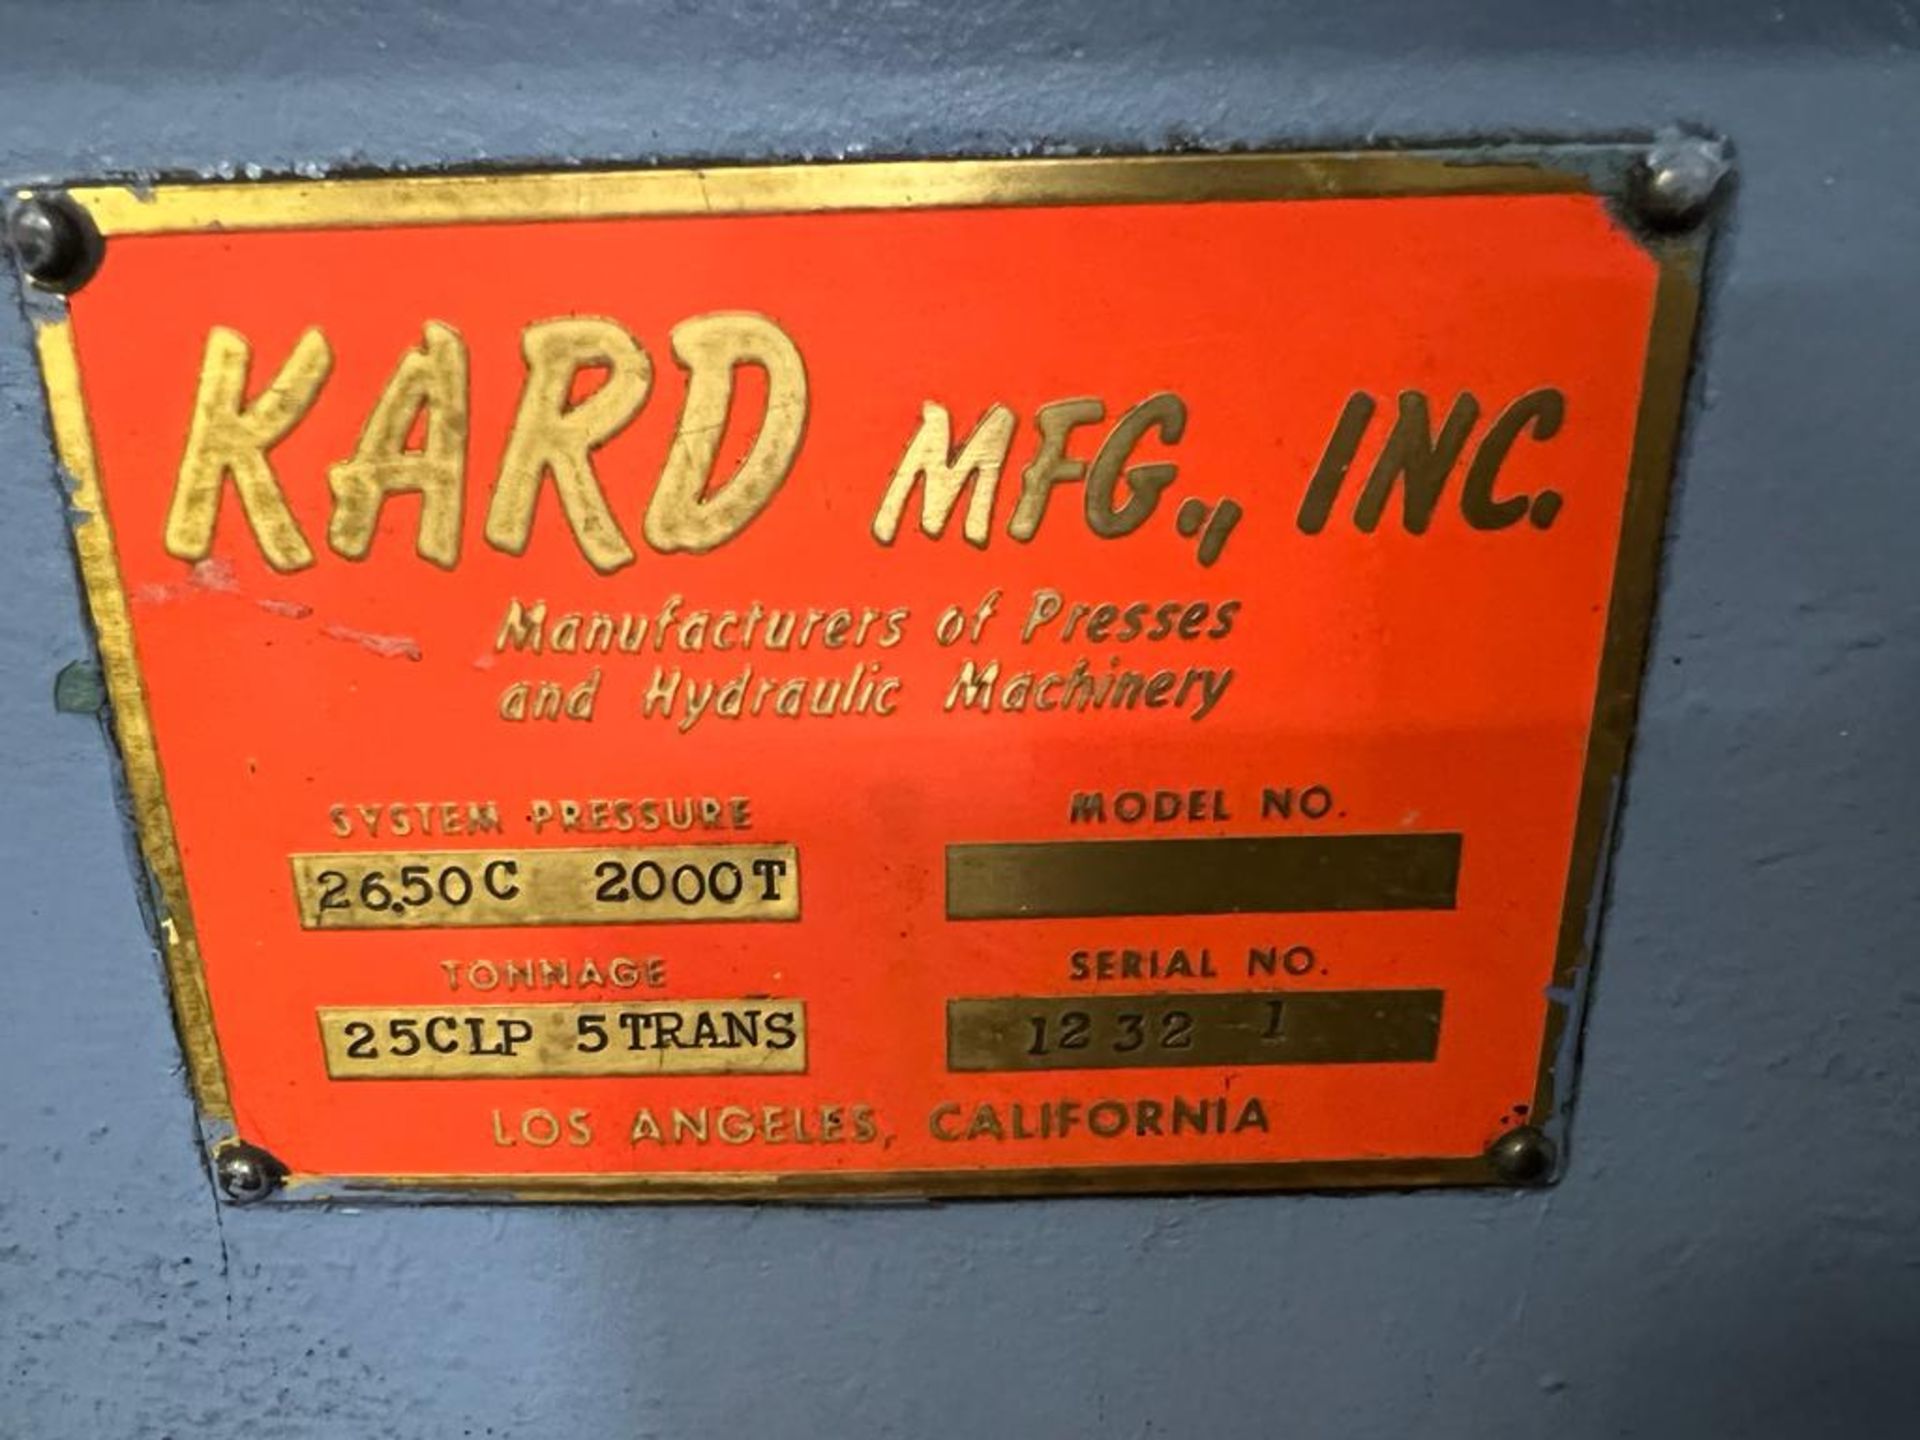 KARD 25 TON HYDRAULIC TRANSFER PRESS, 2000 SYSTEM PRESSURE. (SOLD AS-IS - NO WARRANTY) - Image 4 of 4